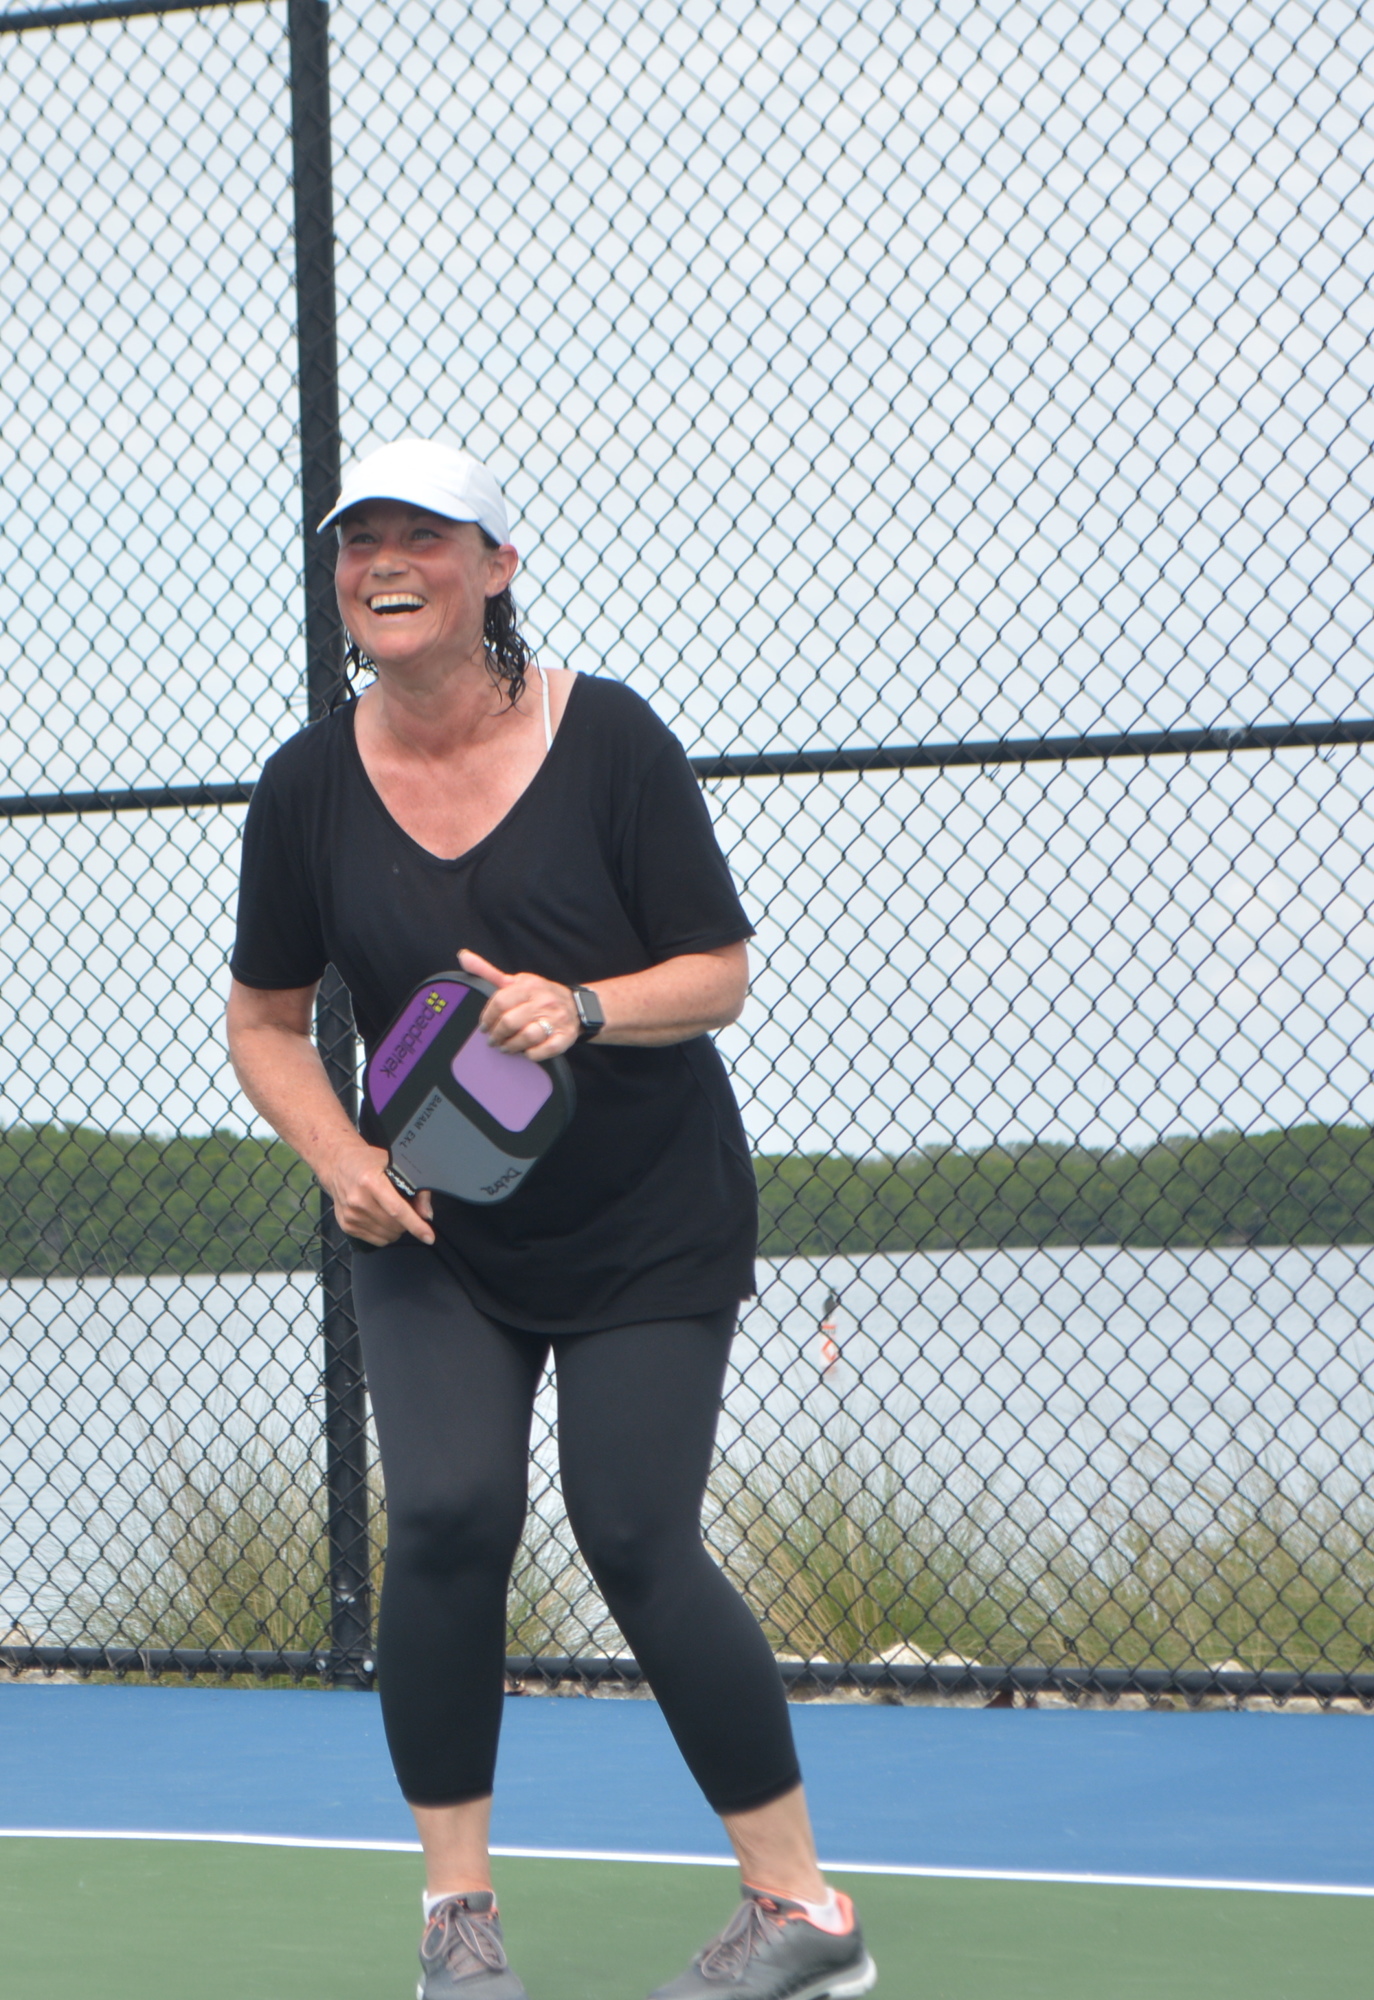 Debra Sauers laughs after a point during her pickleball game Friday at the Beauty and the Beast tournament.